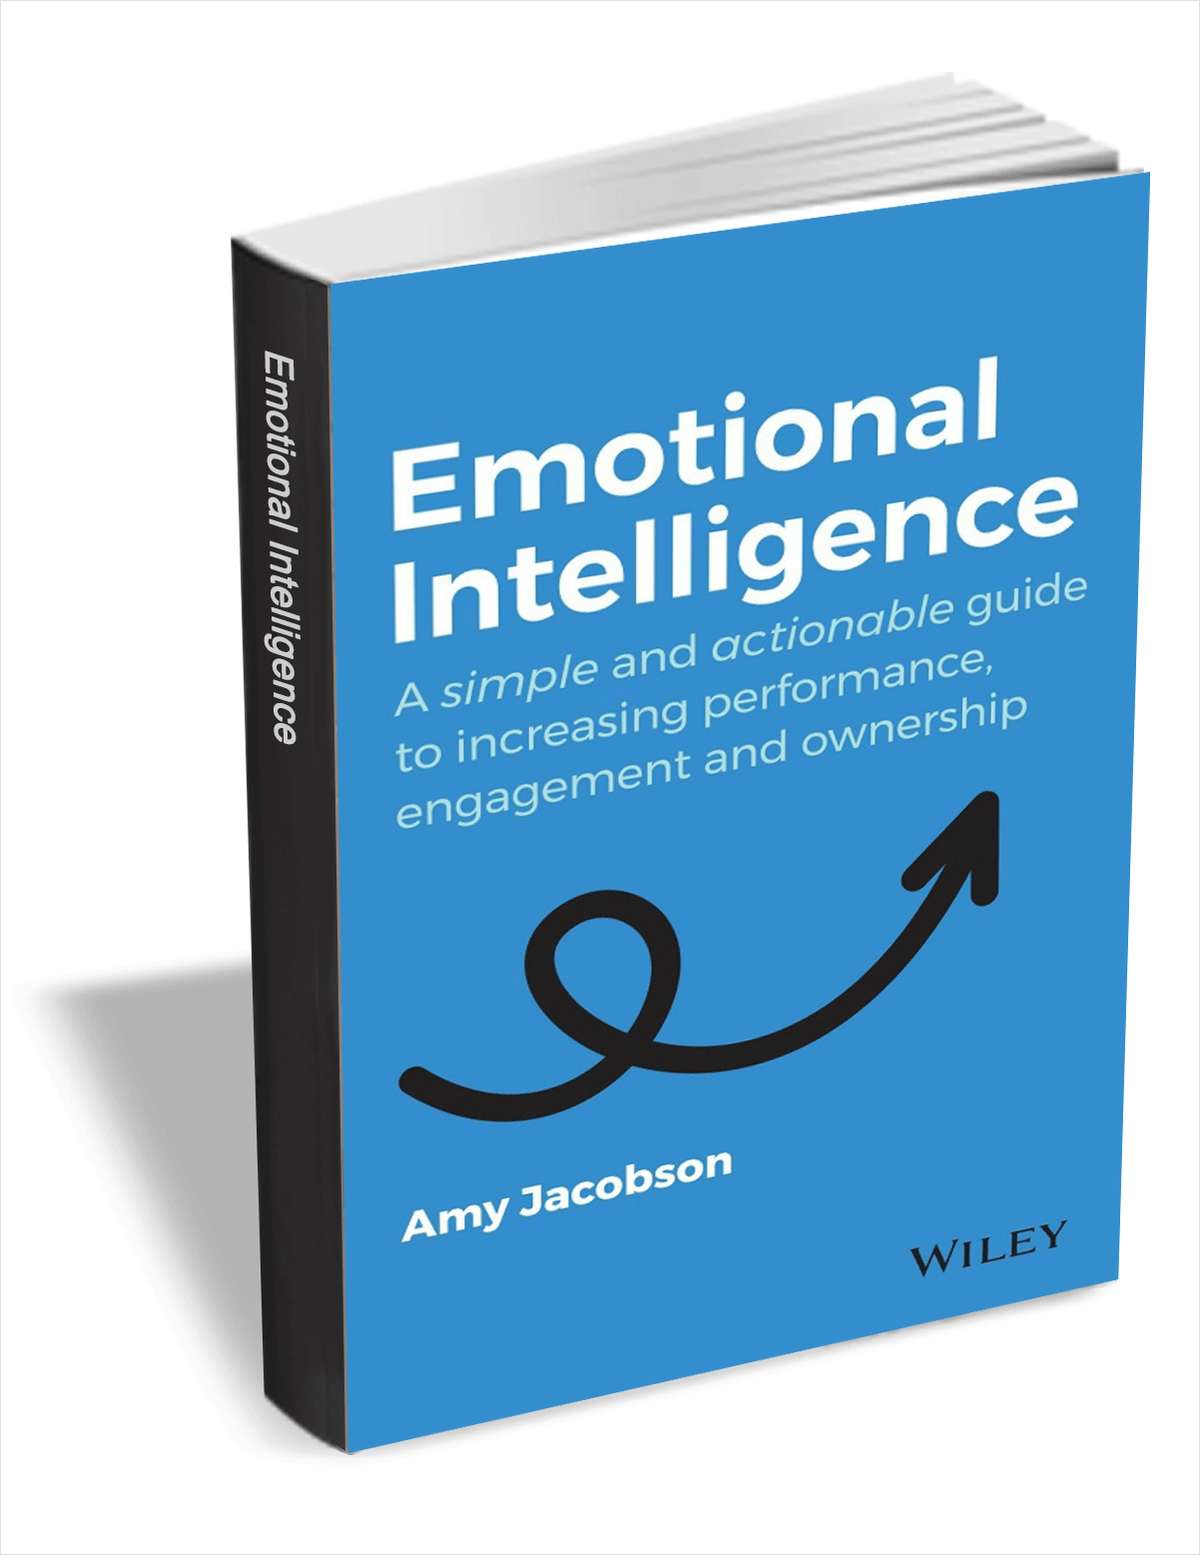 Emotional Intelligence: A Simple and Actionable Guide to Increasing Performance, Engagement and Ownership ($12.00 Value) Free for a Limited Time